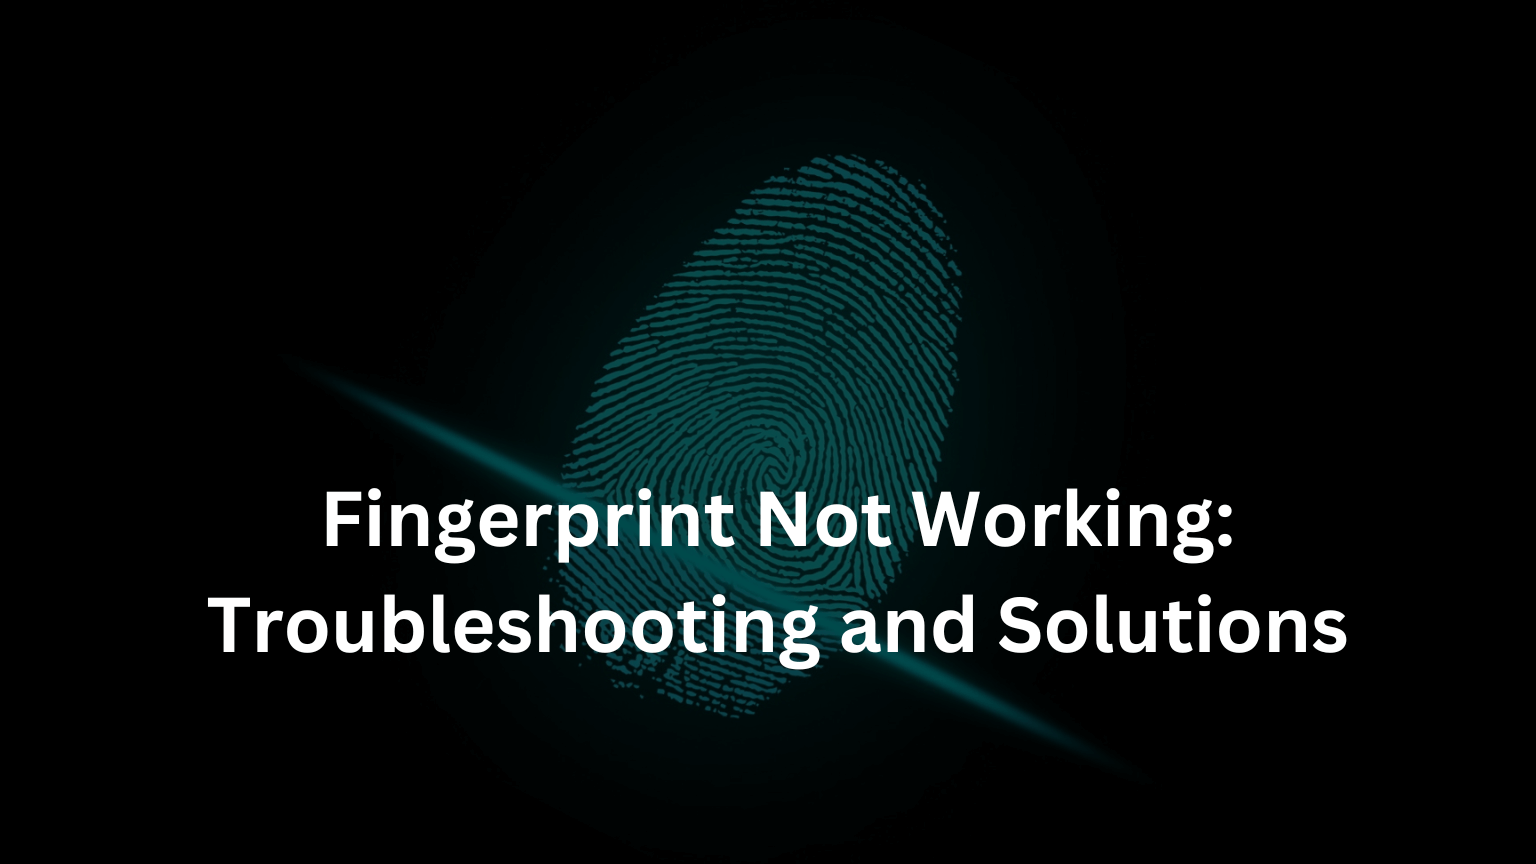 Fingerprint Not Working: Troubleshooting and Solutions